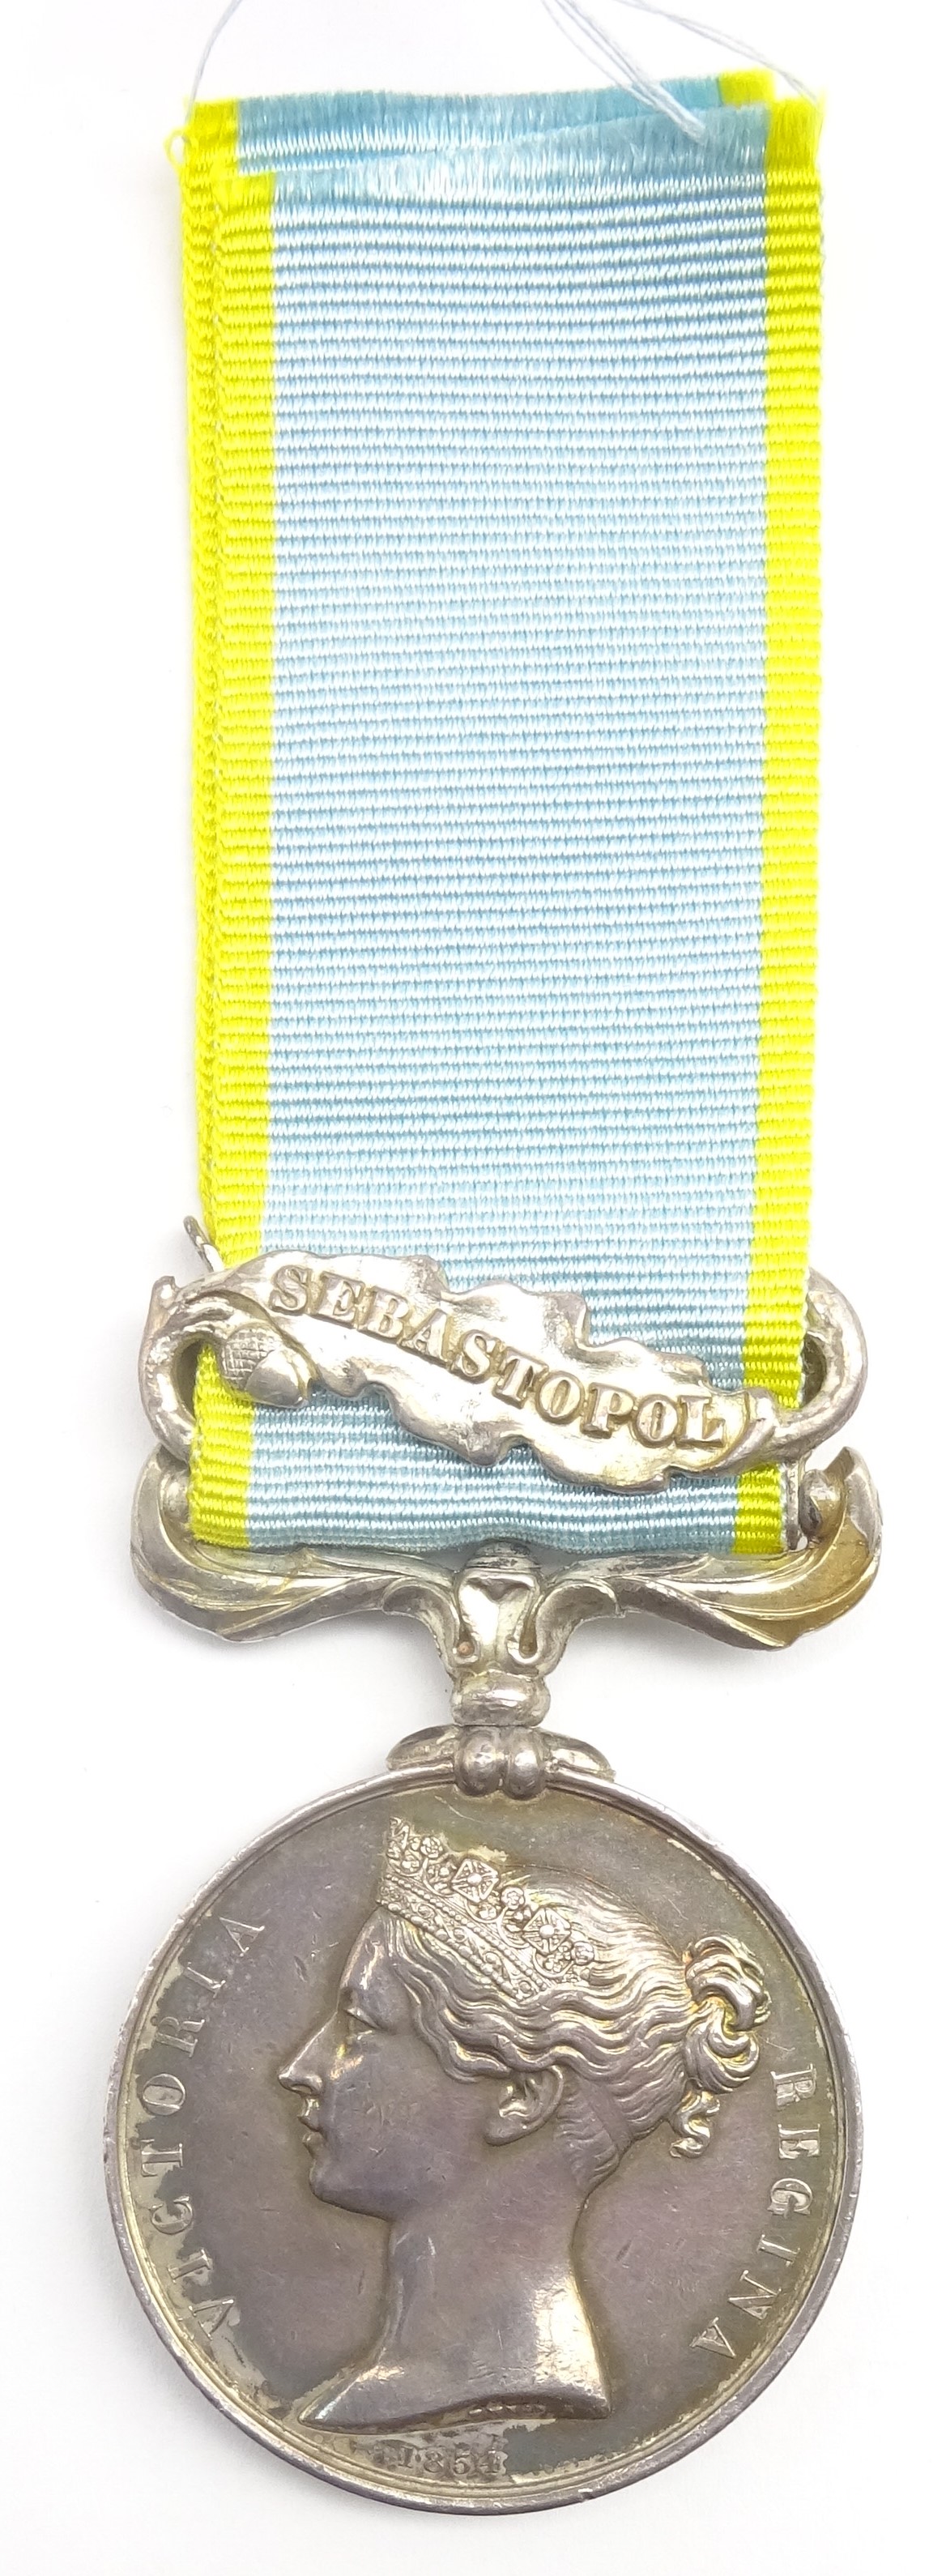 Victorian Crimea medal awarded to R. Thomson 71st Regt.